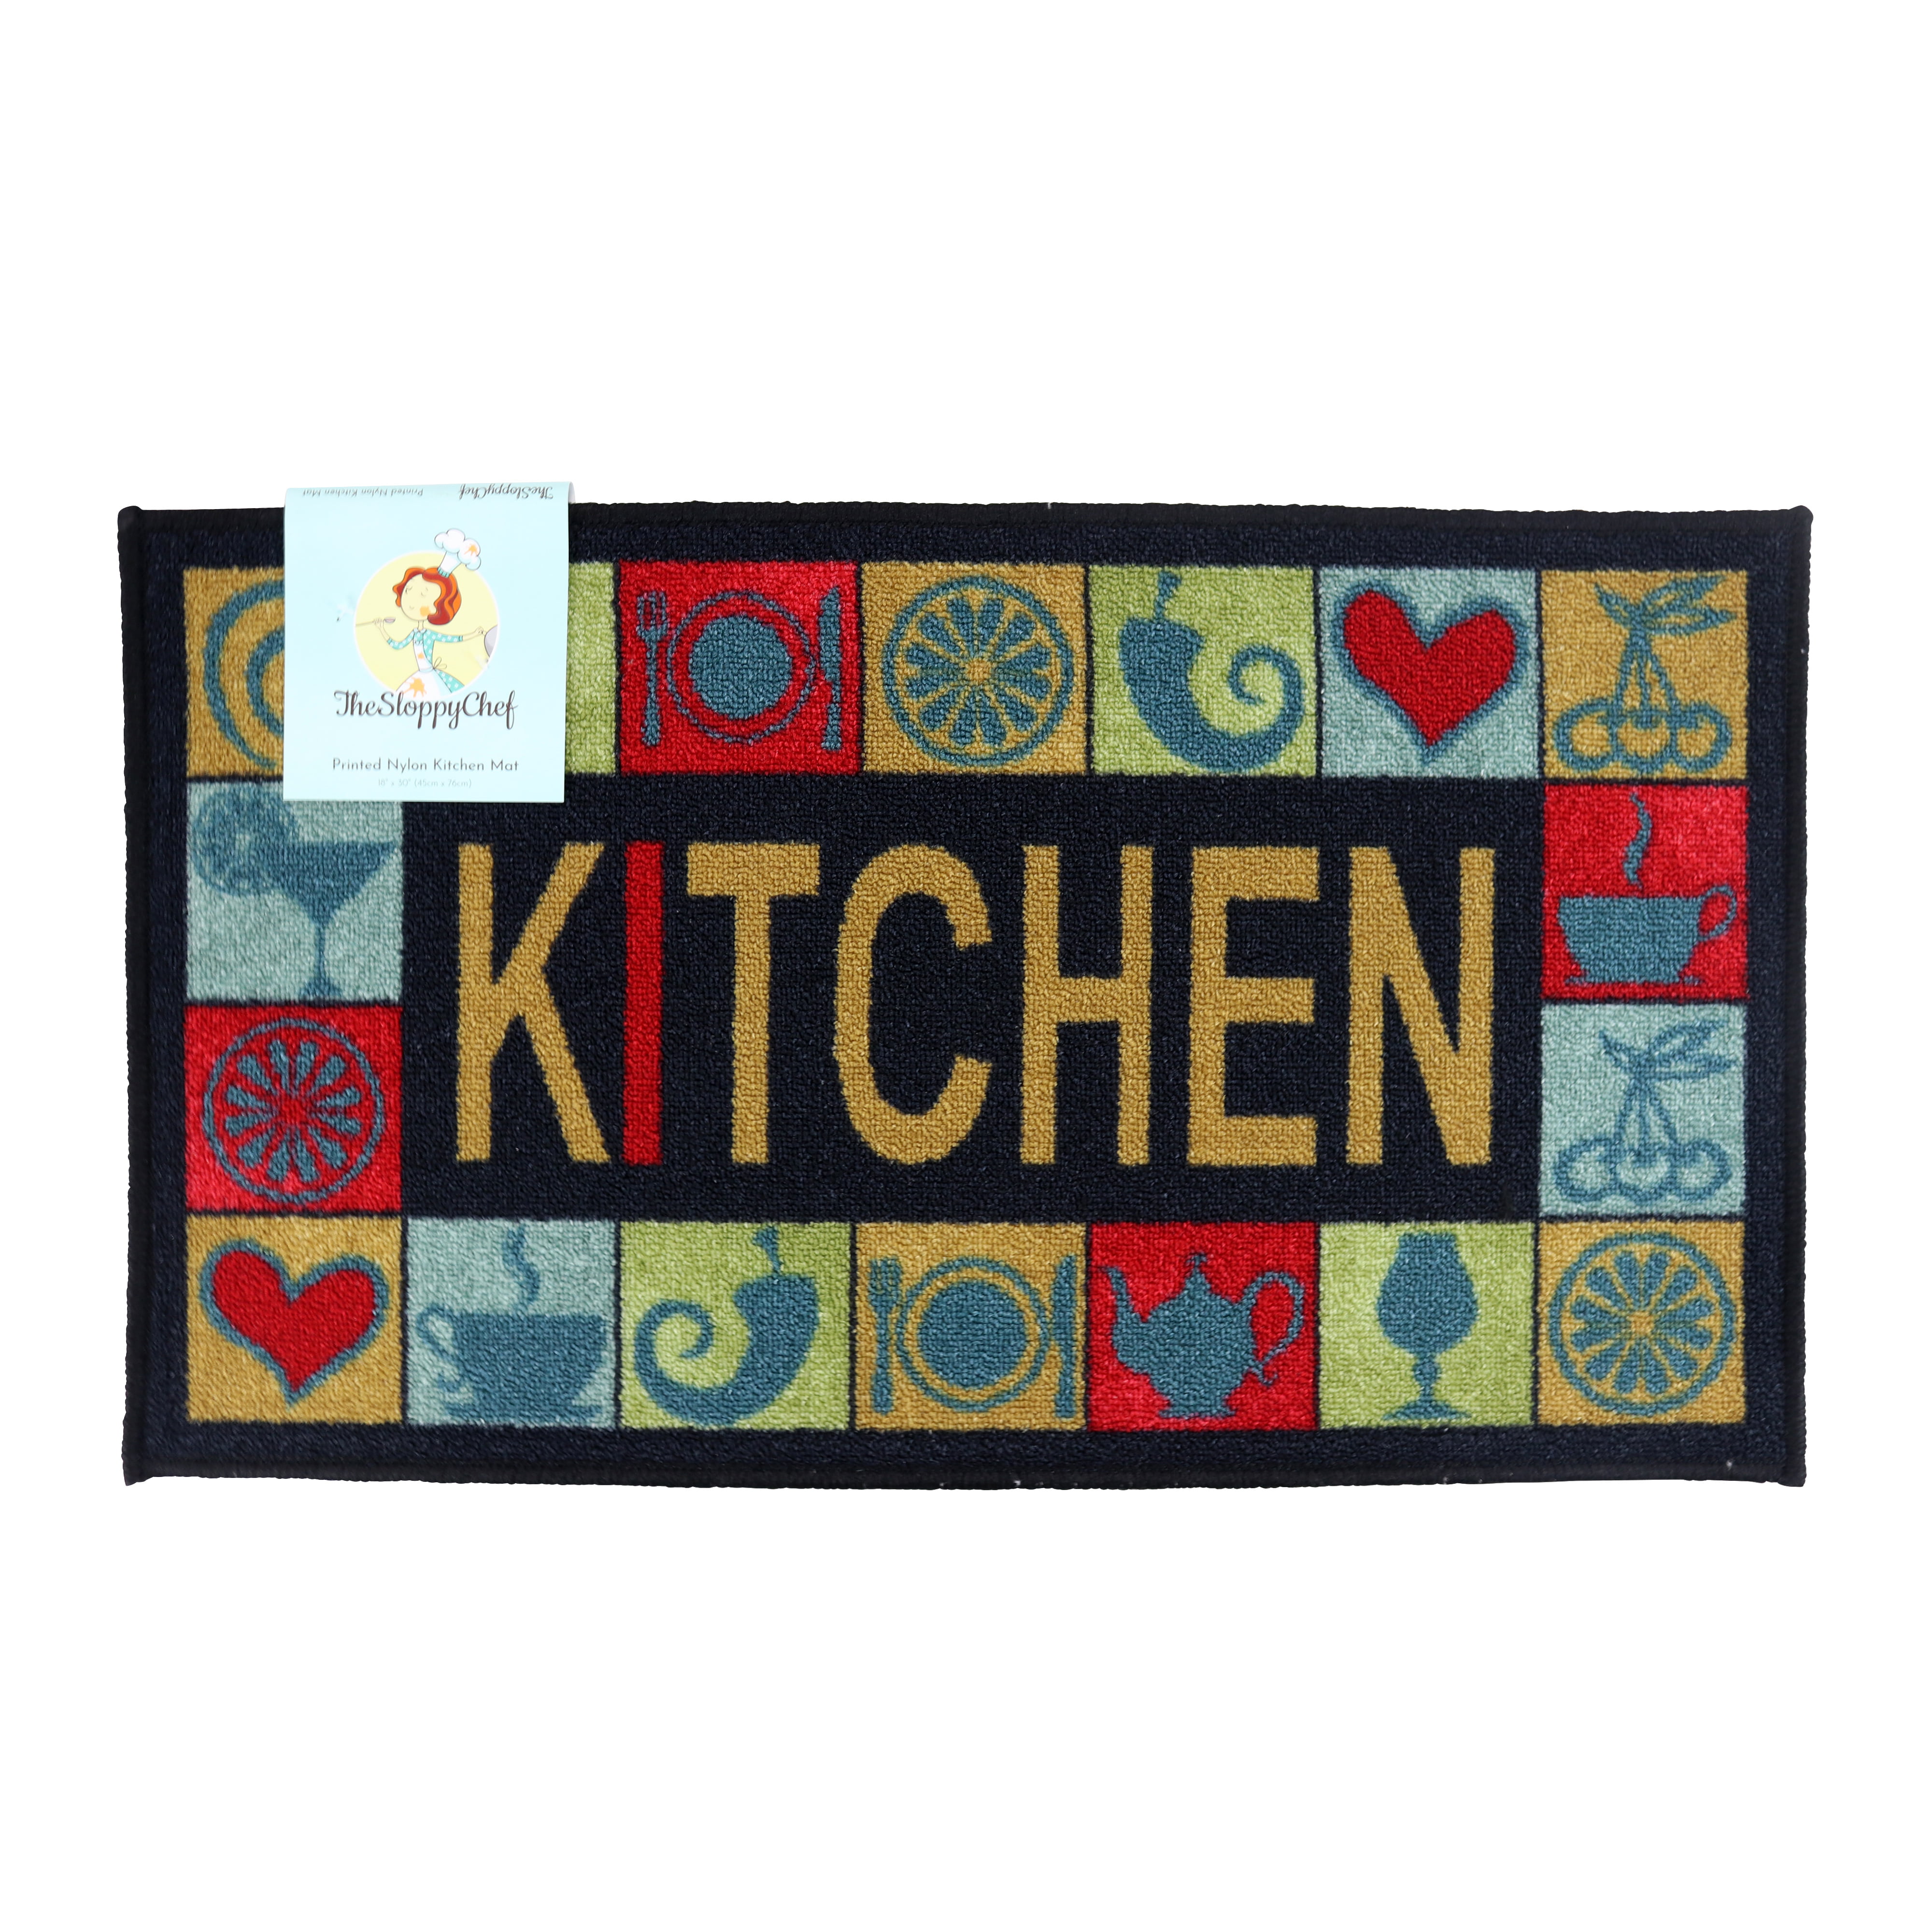 PRINTED KITCHEN RUG nonskid latex back CARROTS by Daniel 18" x 30"